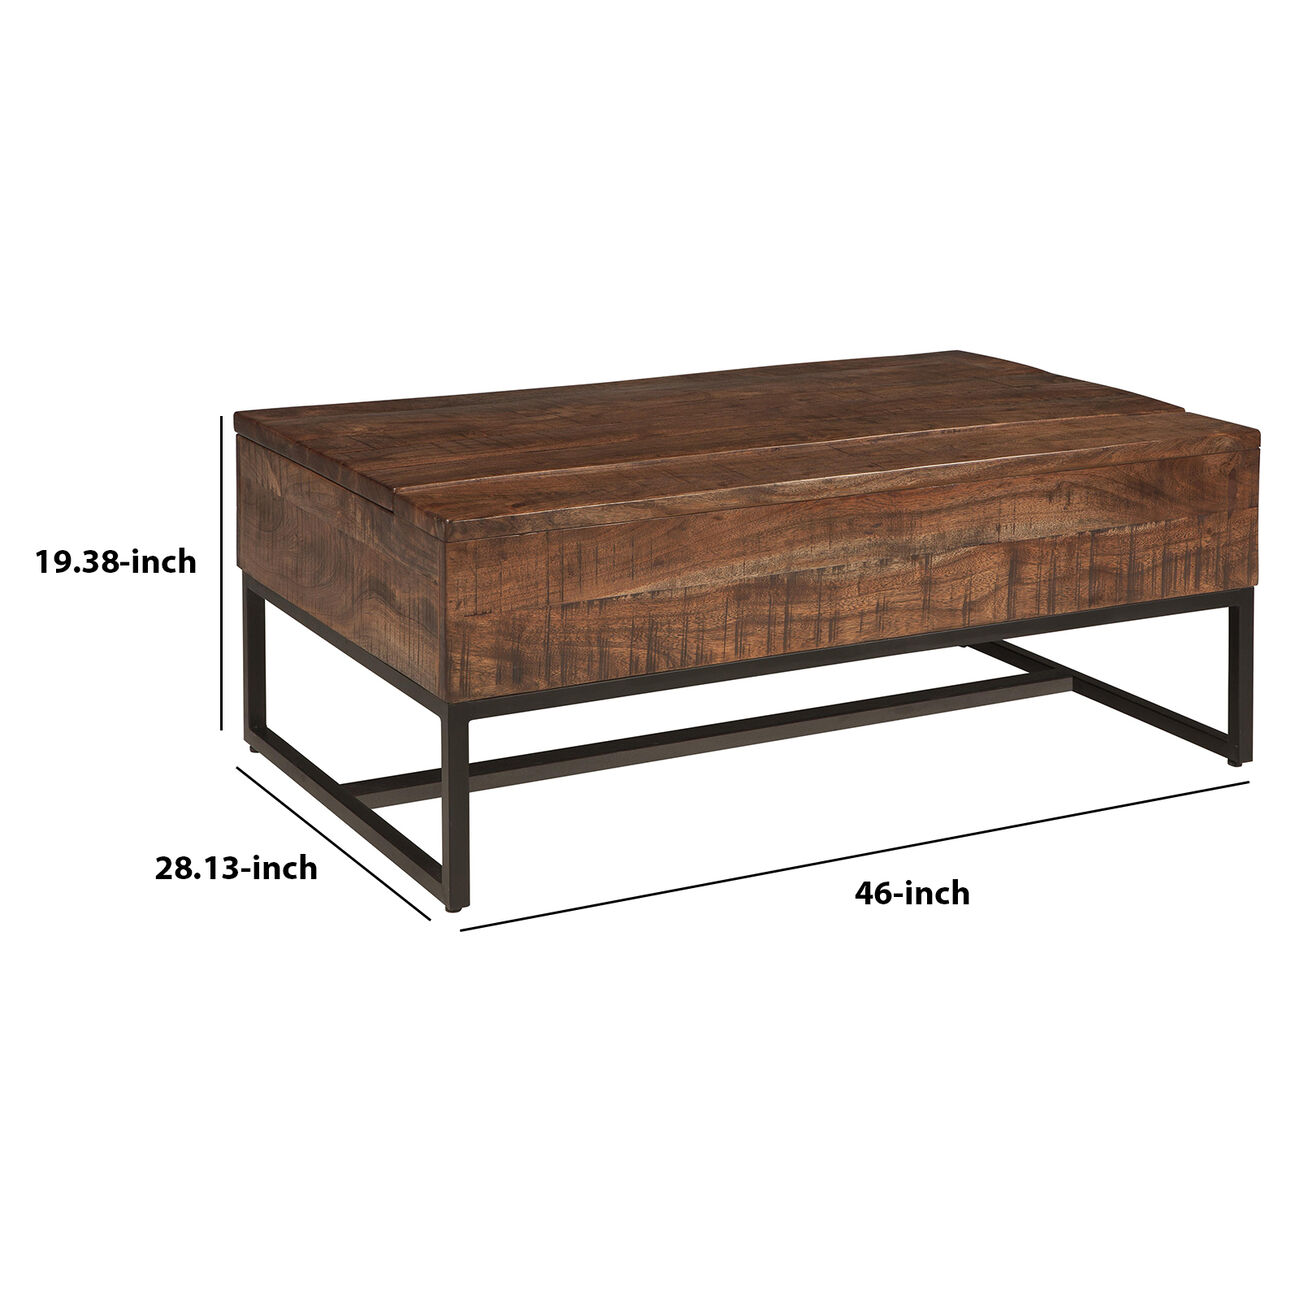 Wooden Plank Style Lift Top Cocktail Table with Metal Base, Brown